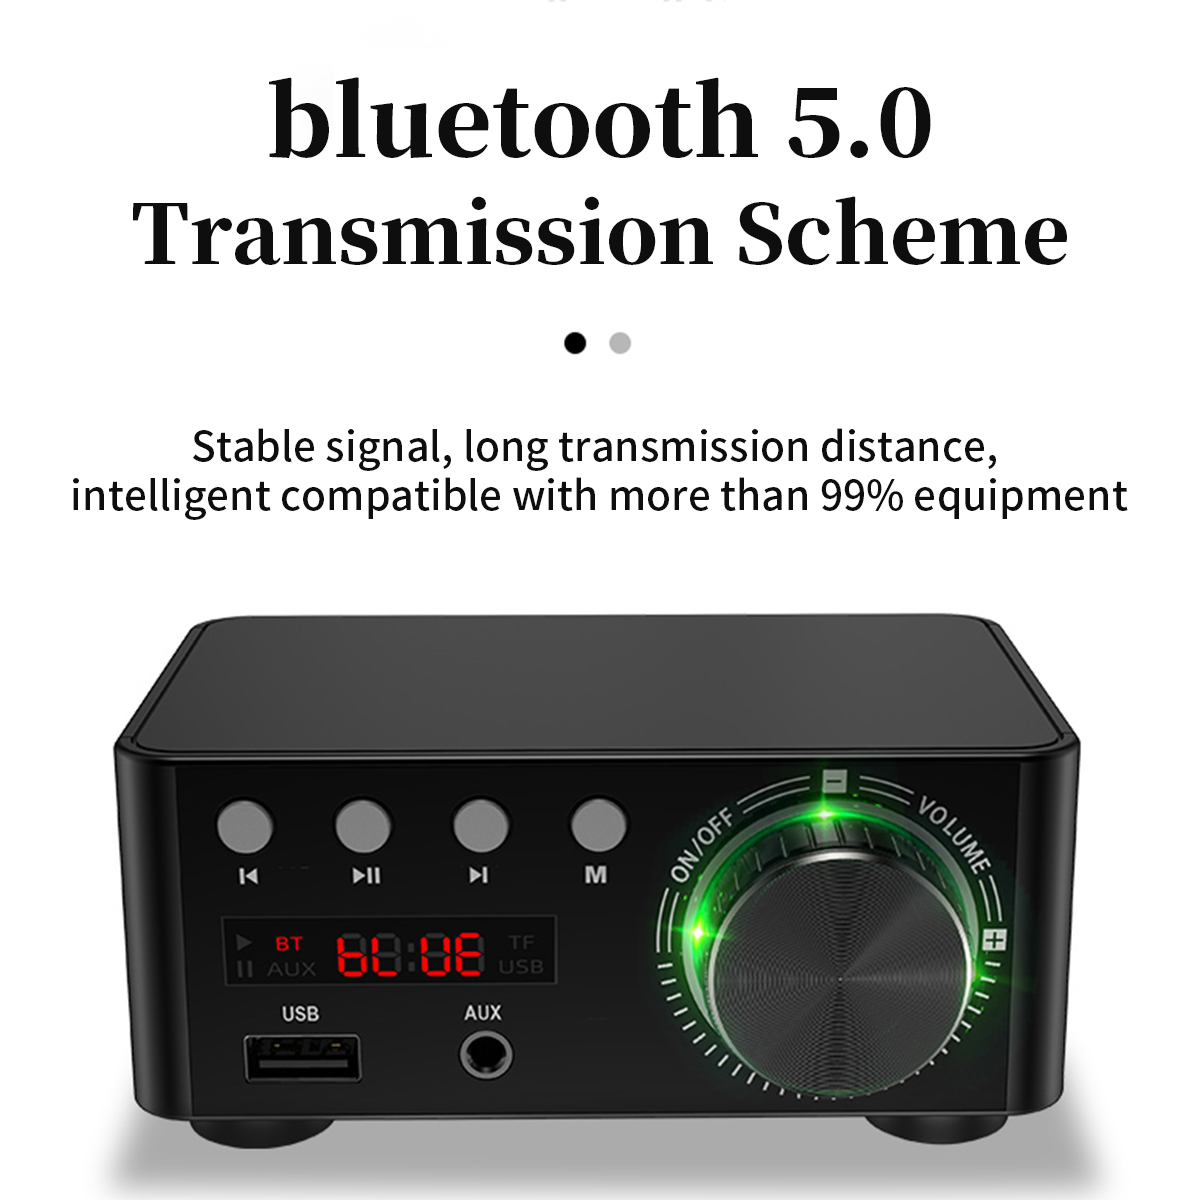 HiFi Mini Digital Amplifier bluetooth 5.0 Amplifier RCA Stereo Sound TF Card U Disk AUX Lossless Sound Powerful Digital Amplifier for TV Computer